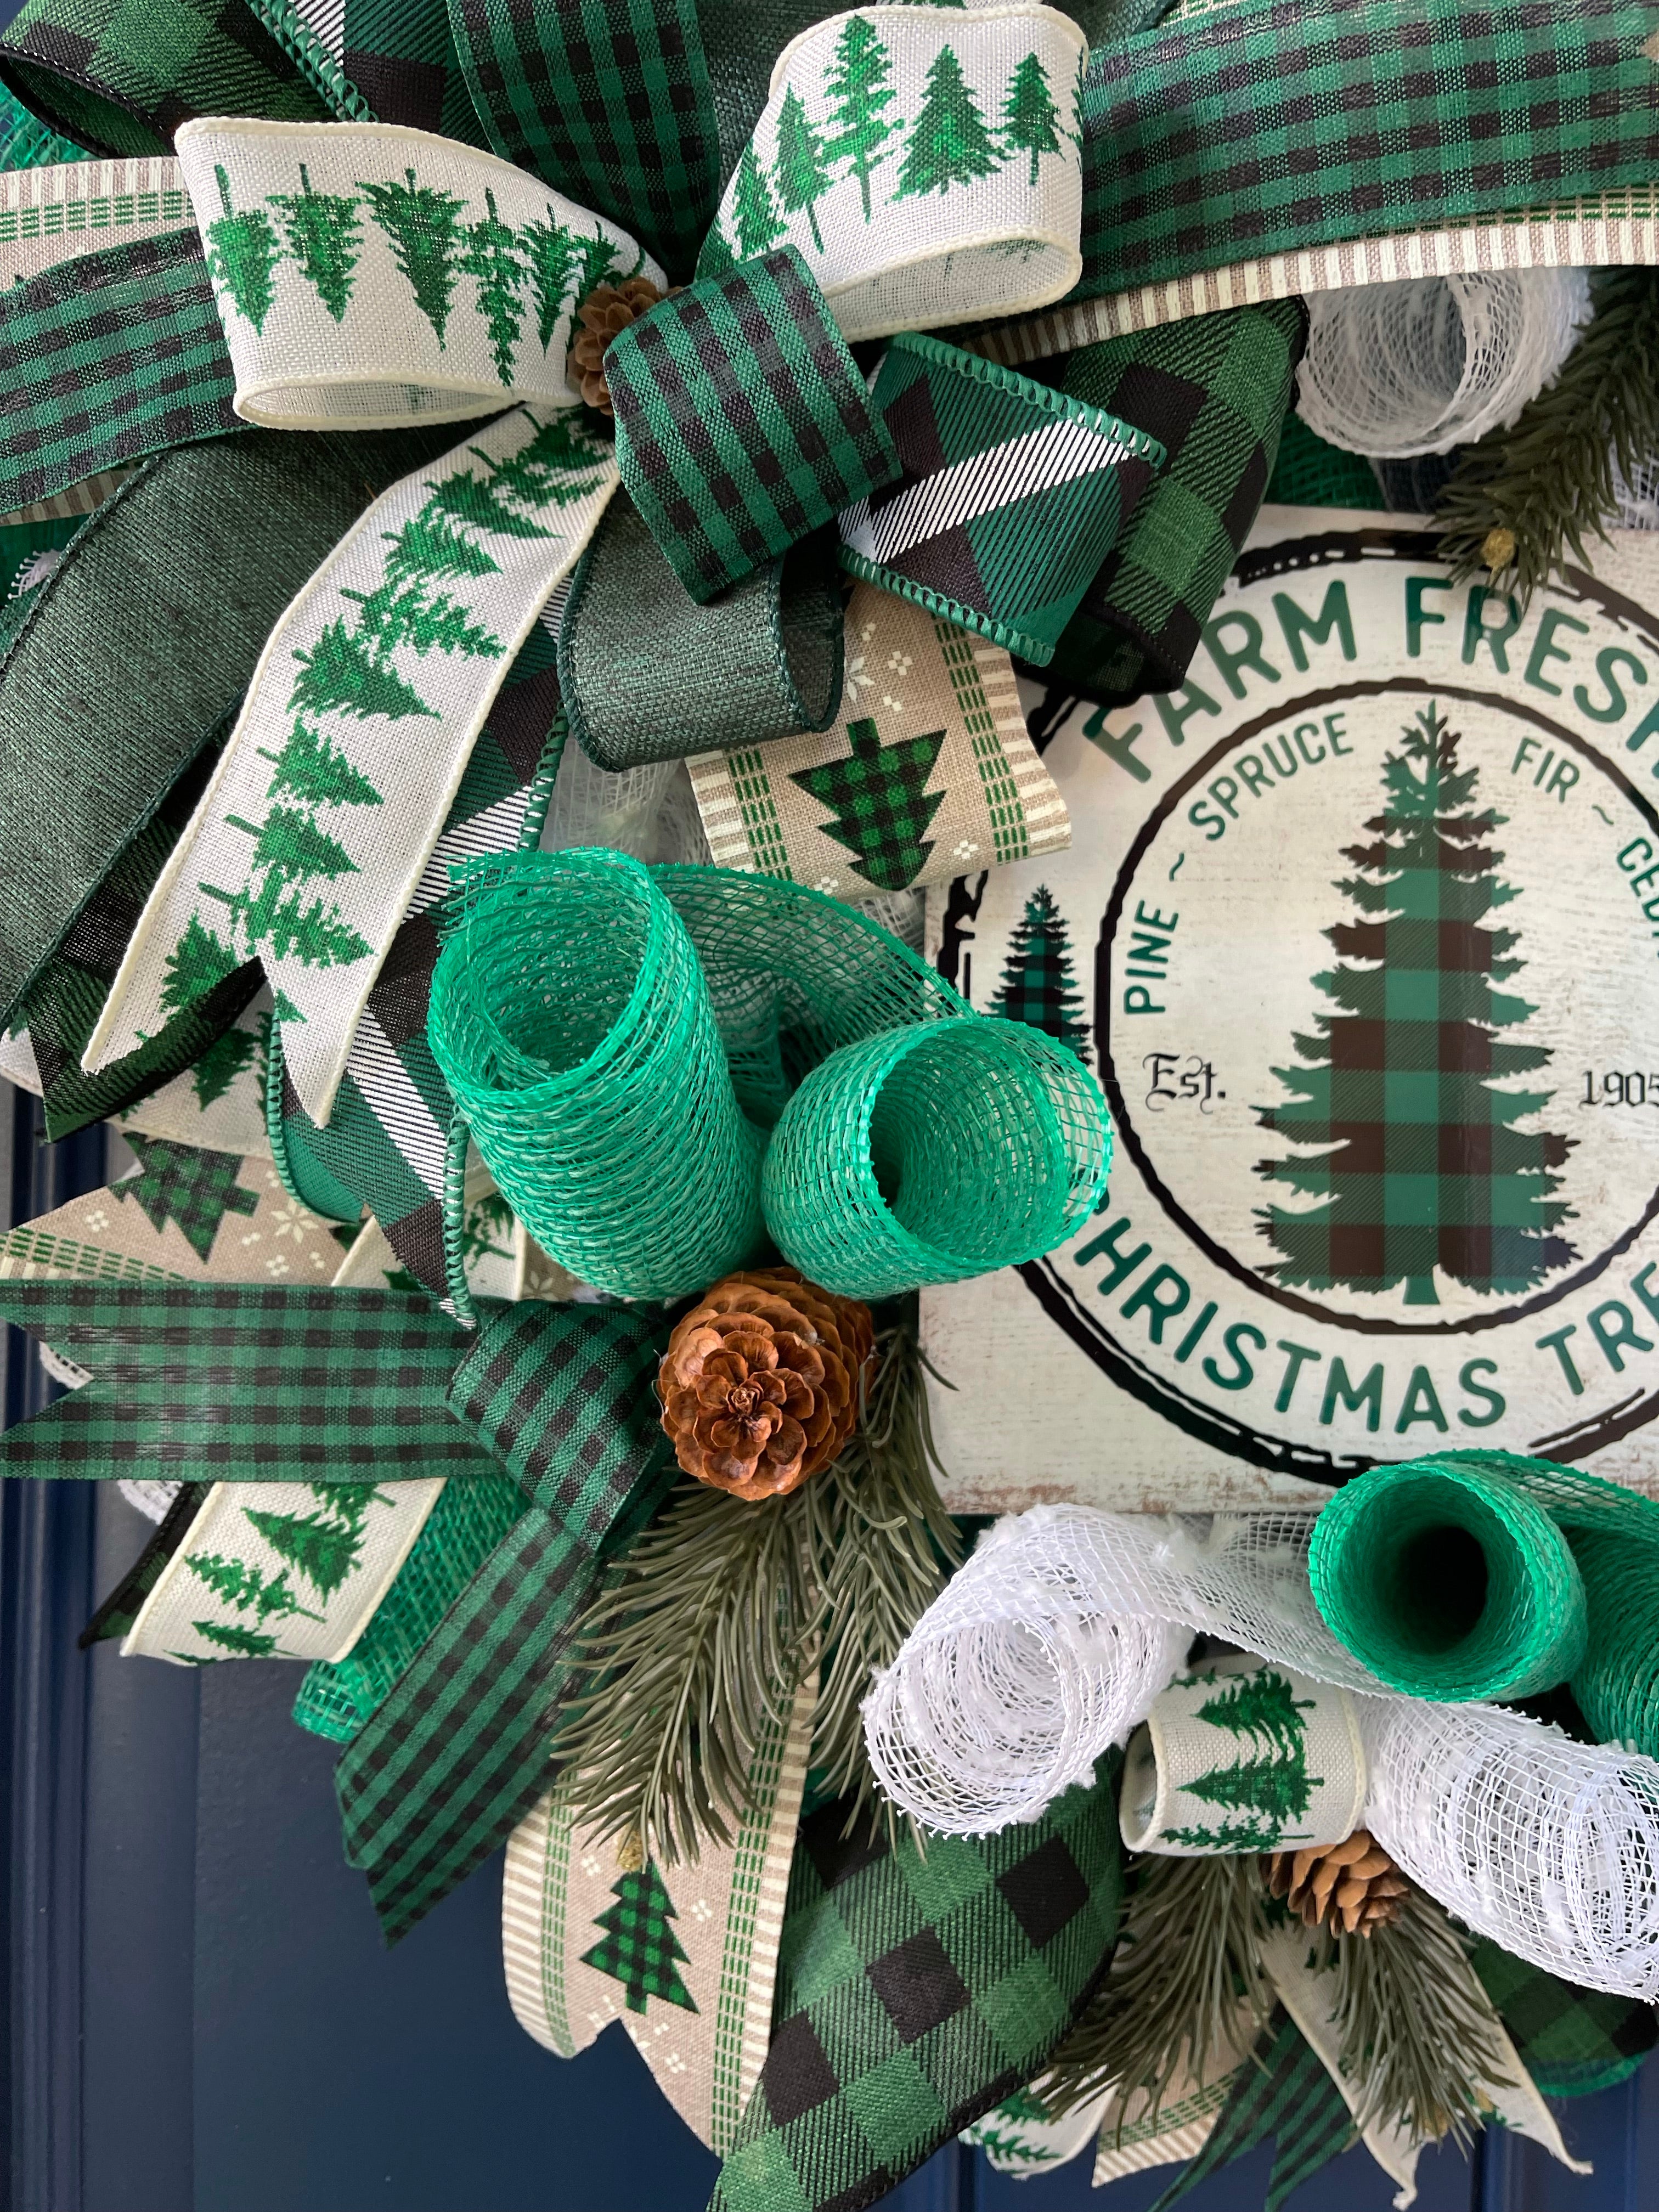 Close up of Farm Fresh Christmas Wreath featuring deco mesh curls of white and green, ribbons of black, white and green along with a Farm Fresh Christmas Tree sign, pine cones and artificial pine sprigs